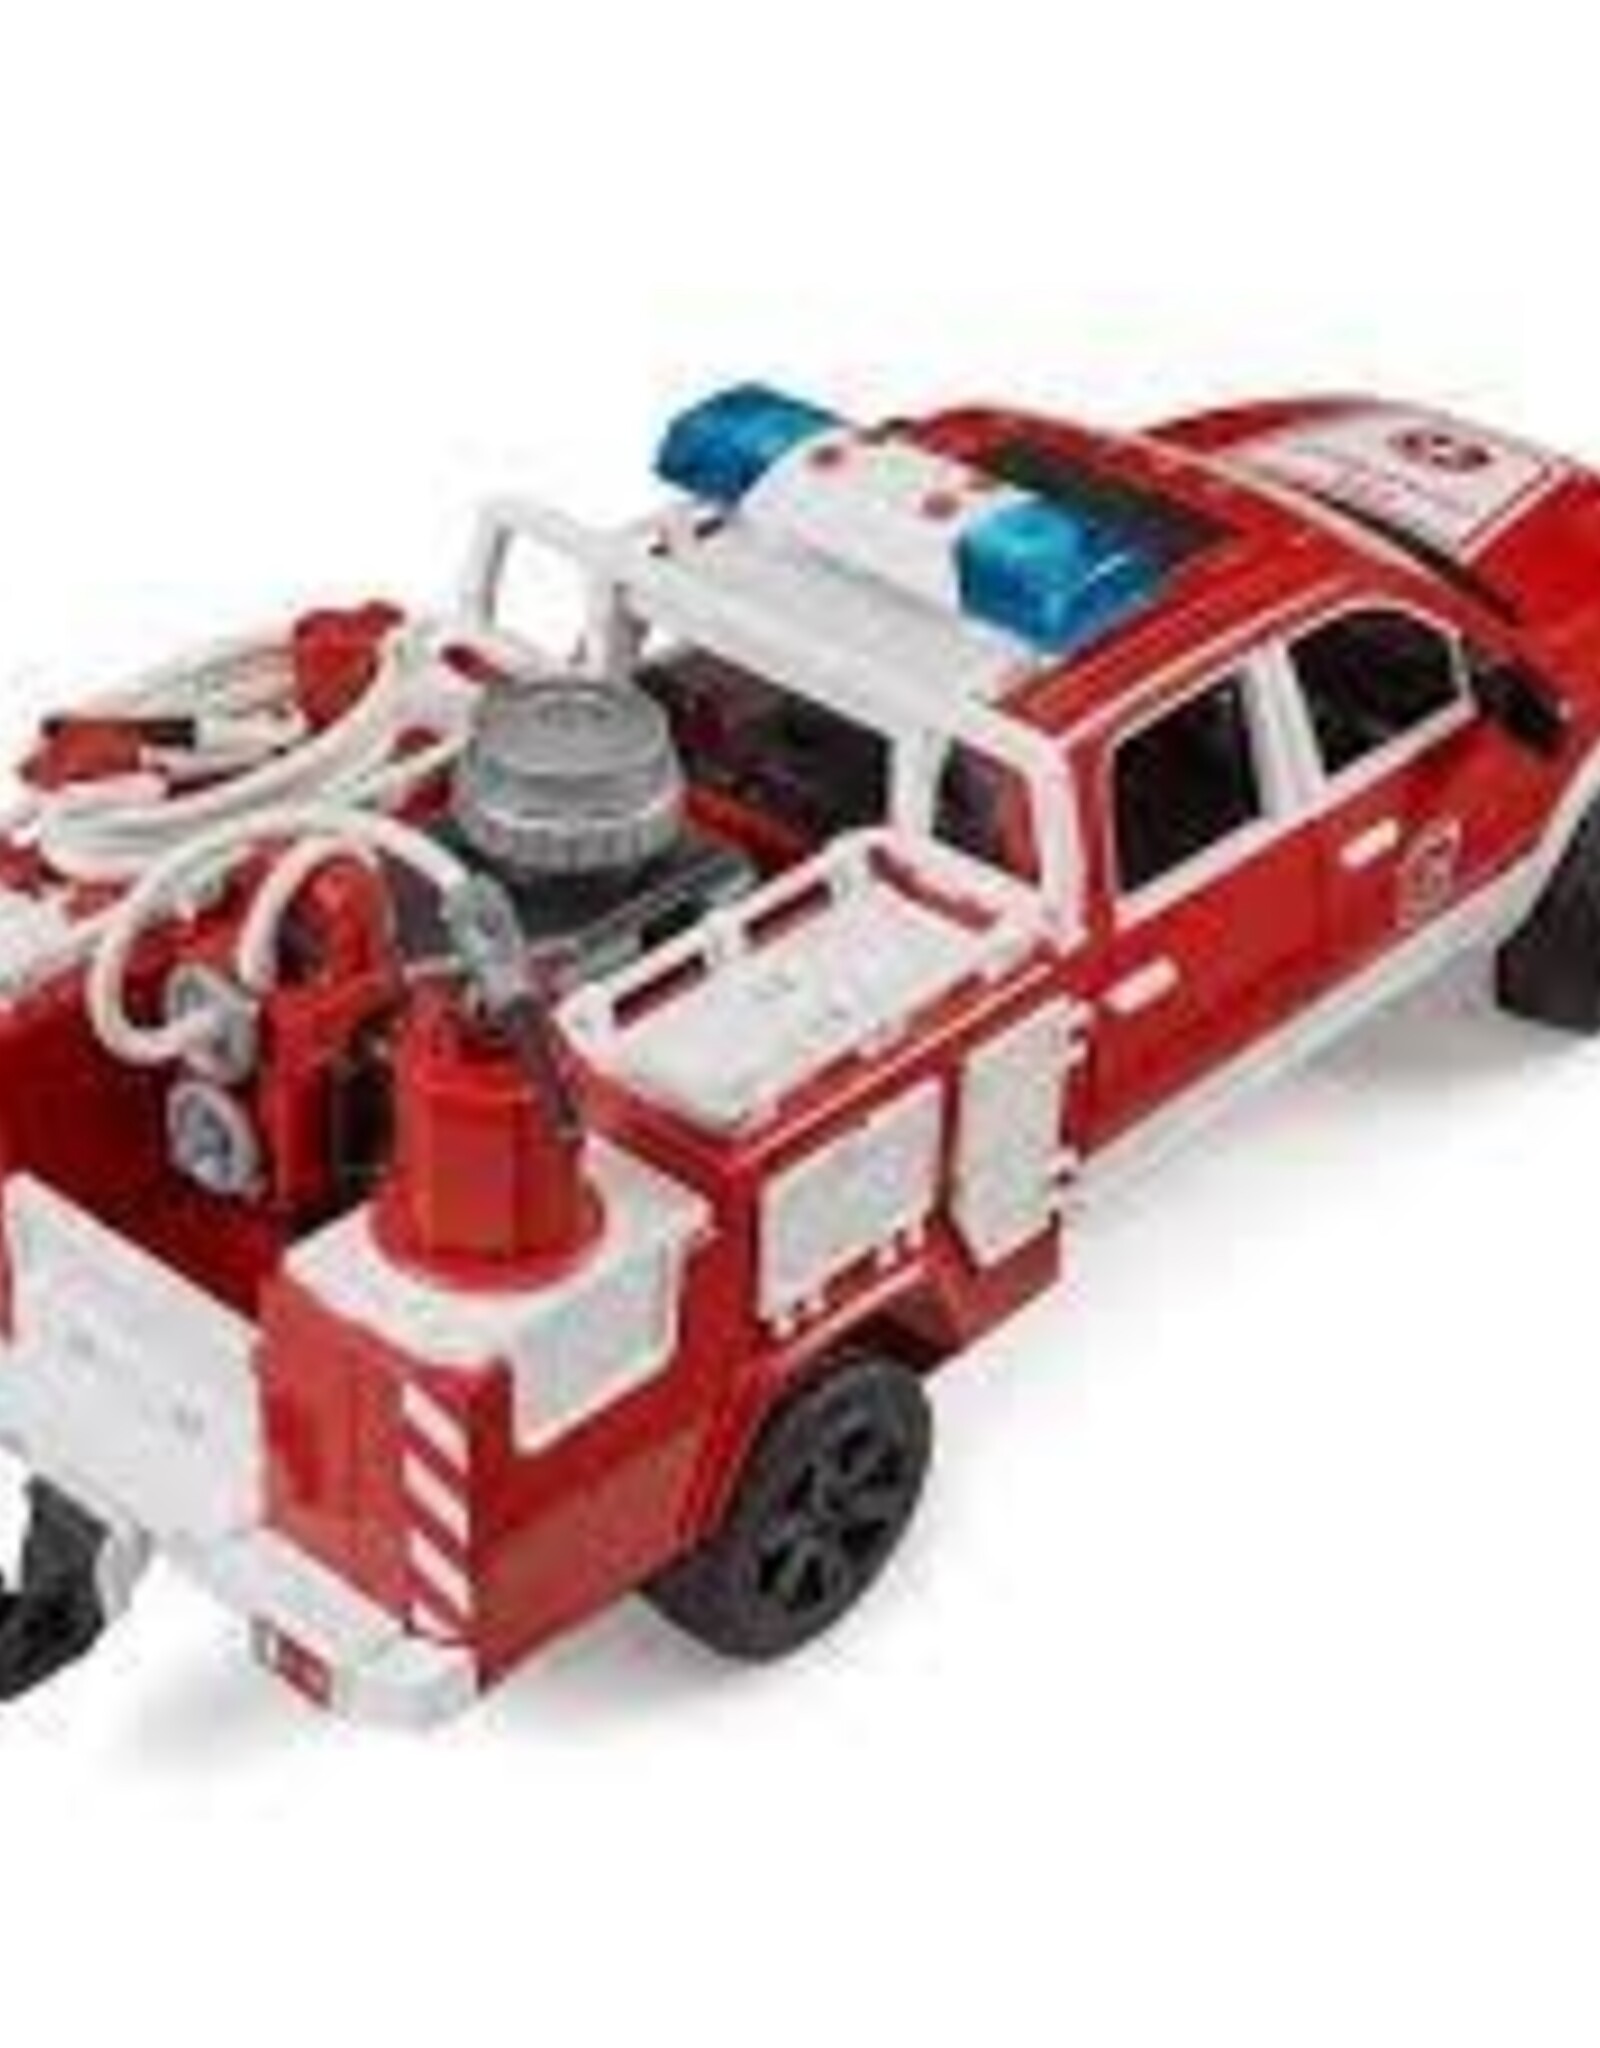 Bruder RAM 2500 Fire Engine Truck with Light and Sound Module